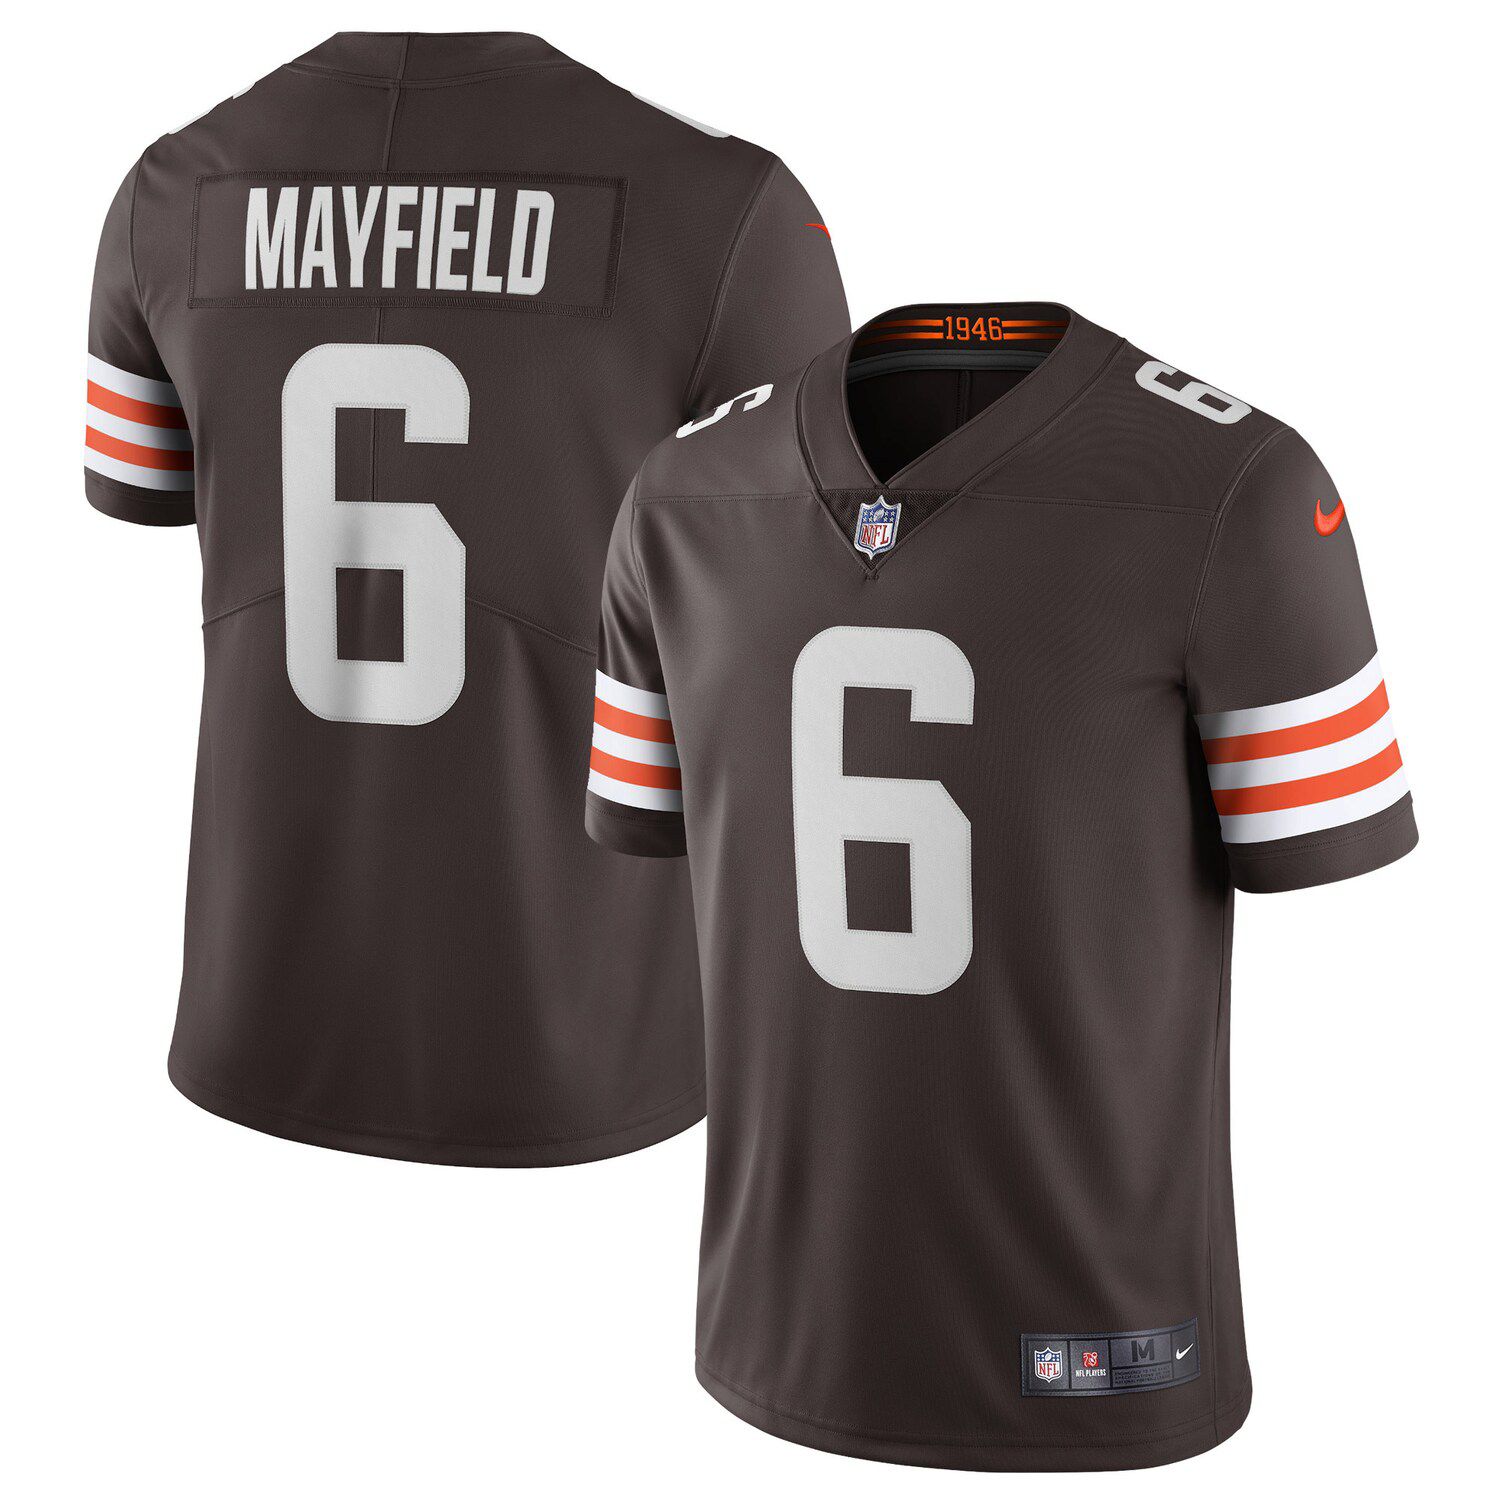 mayfield browns jersey